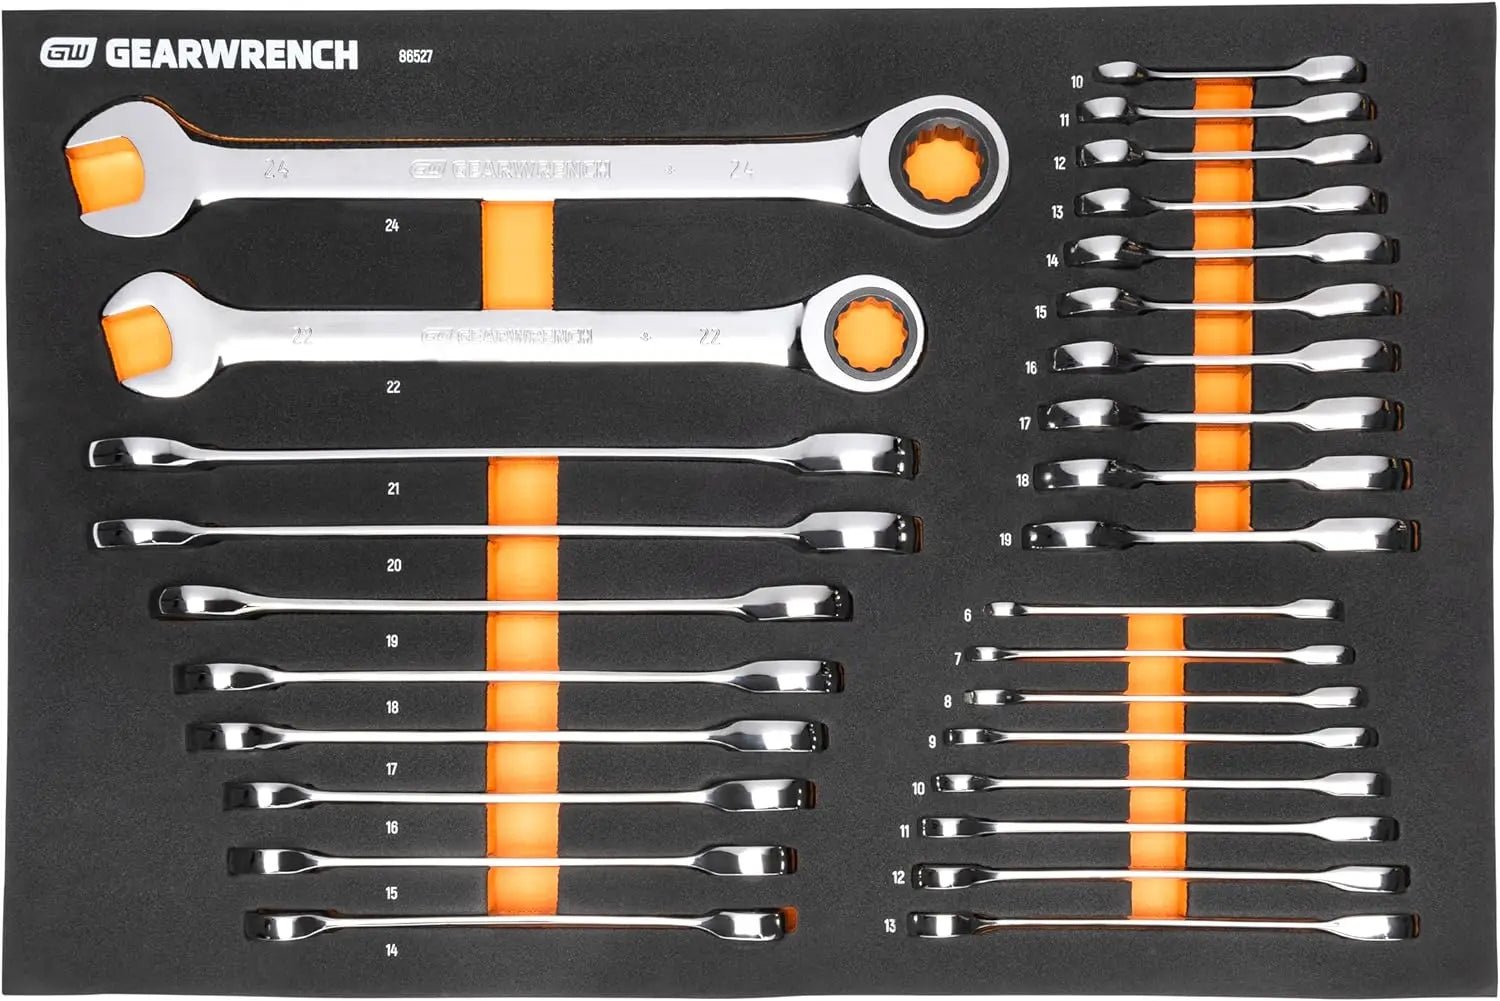 GEARWRENCH 21 Piece 3/8" 90T Ratchet & Drive Tool Set with EVA Foam Tray - 86521